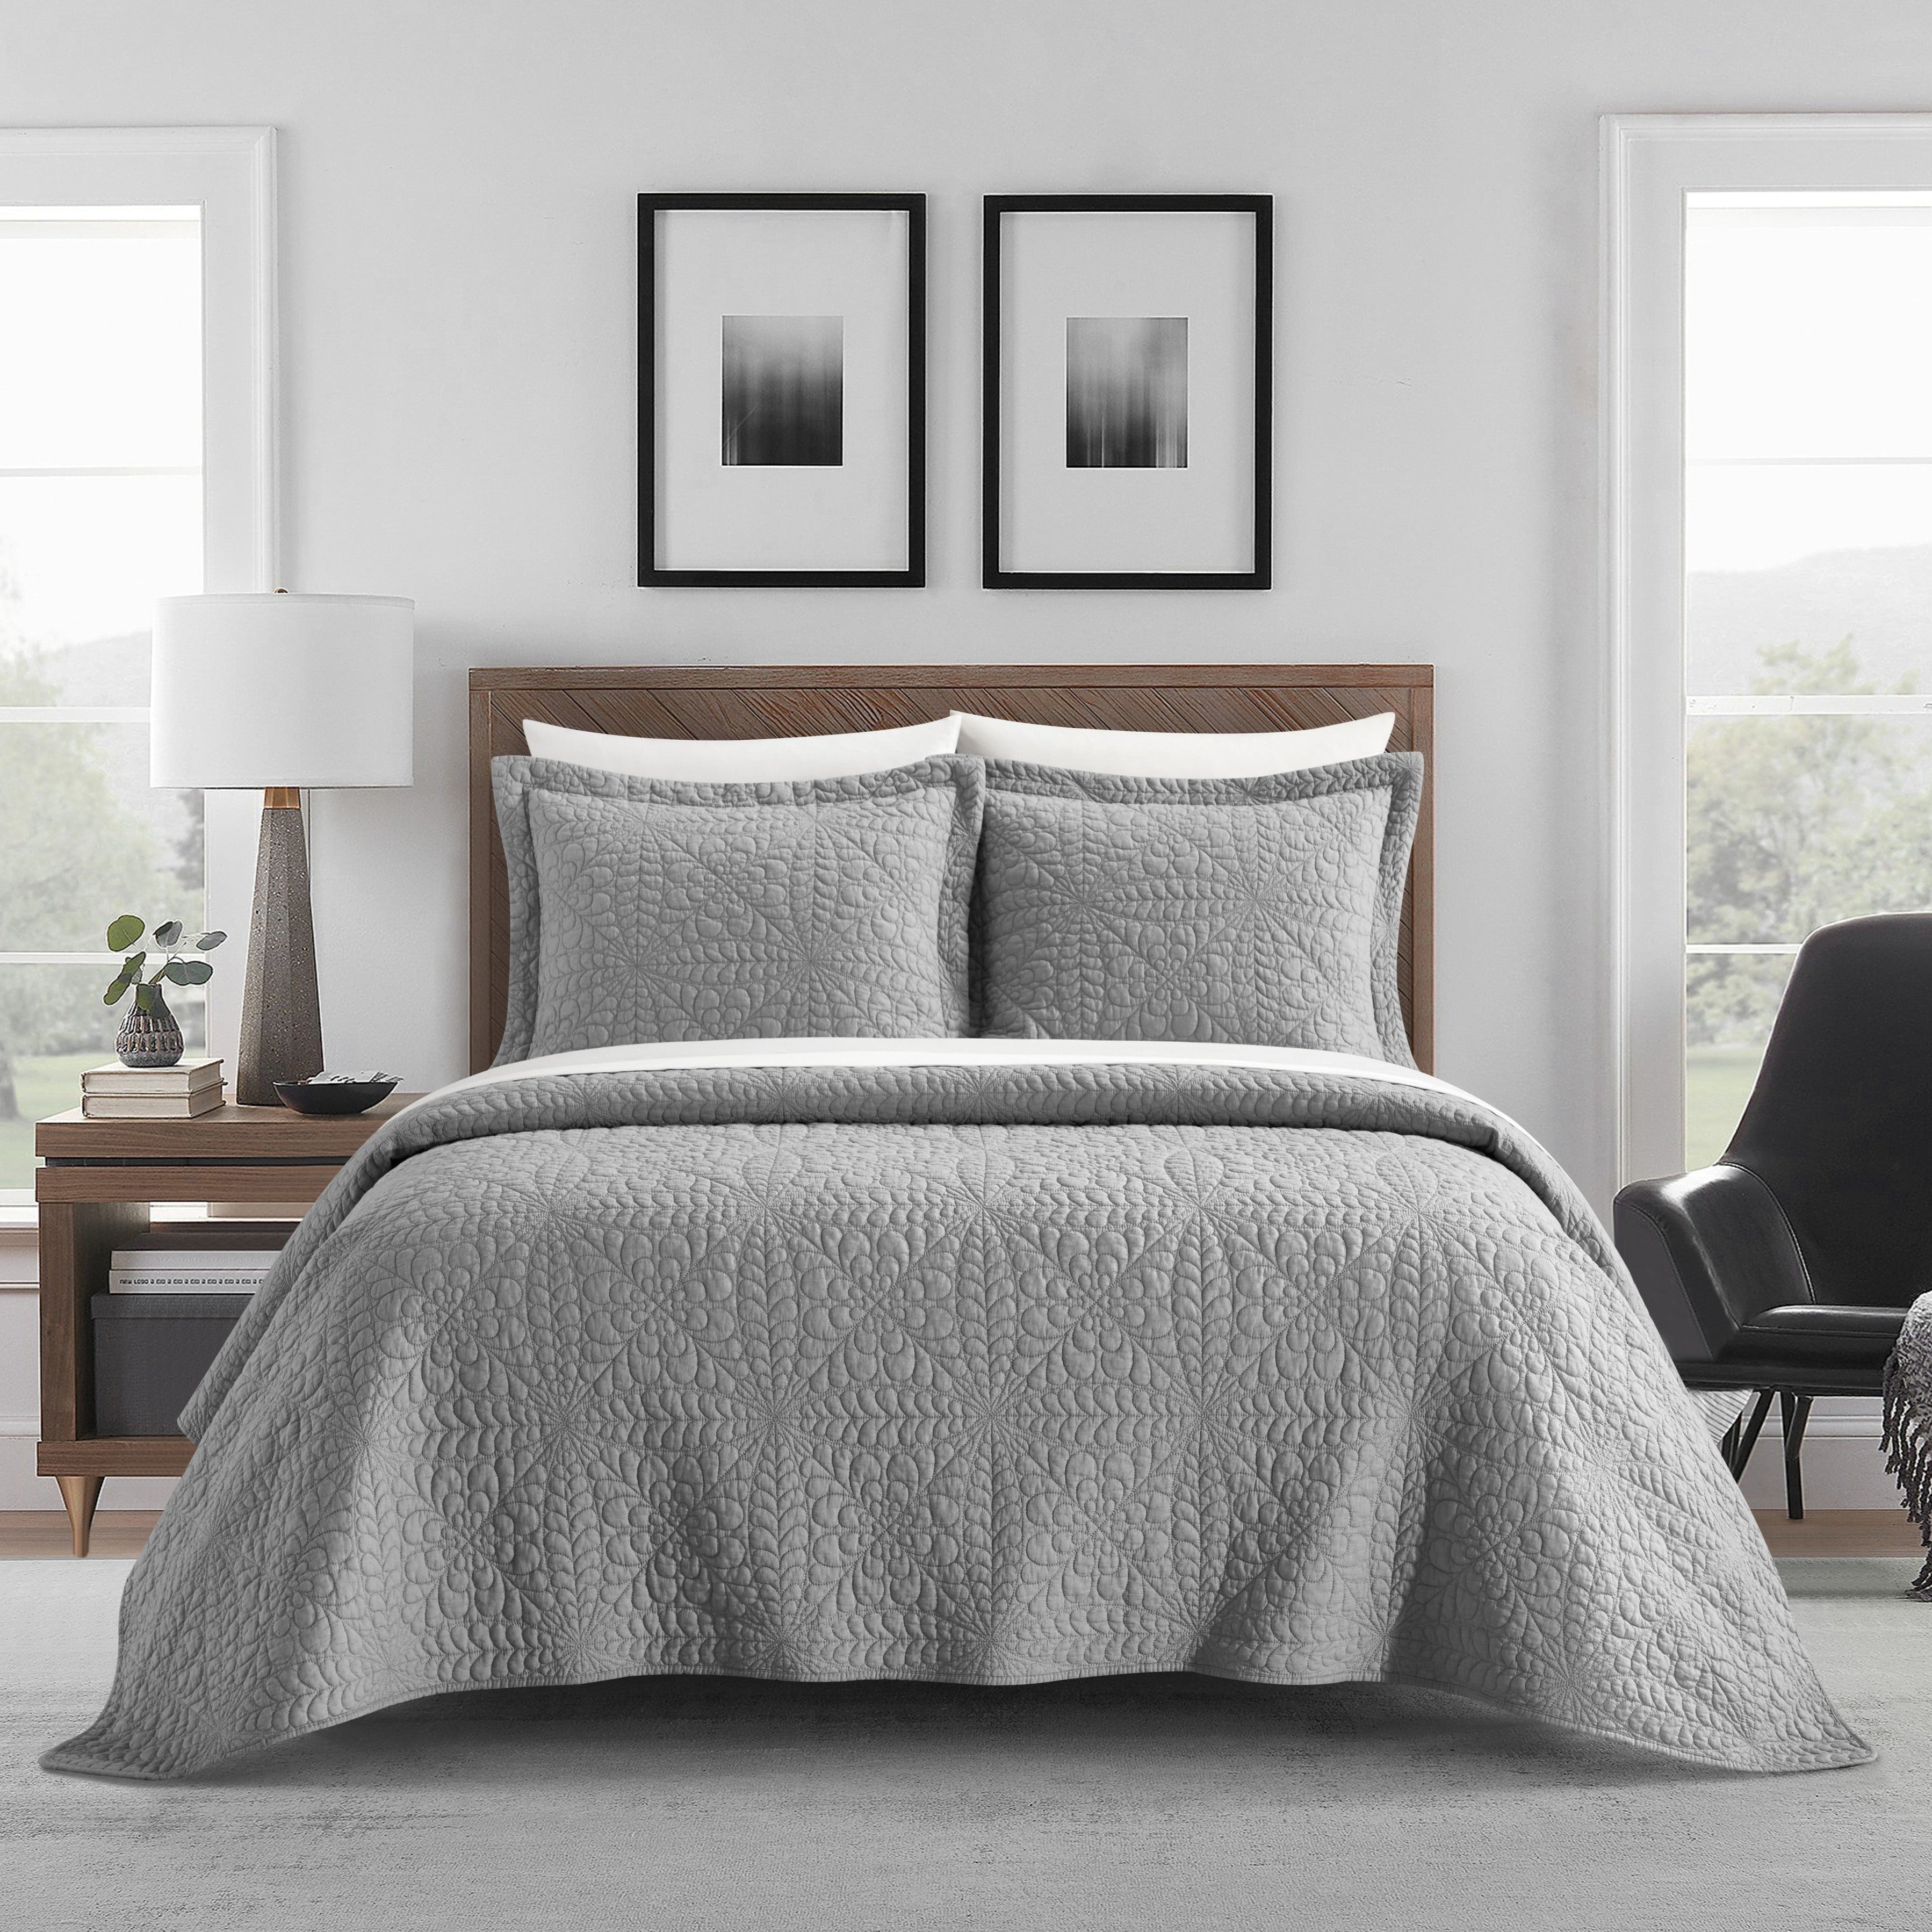 NY&C Home Babe 7 Piece Cotton Quilt Set Grey